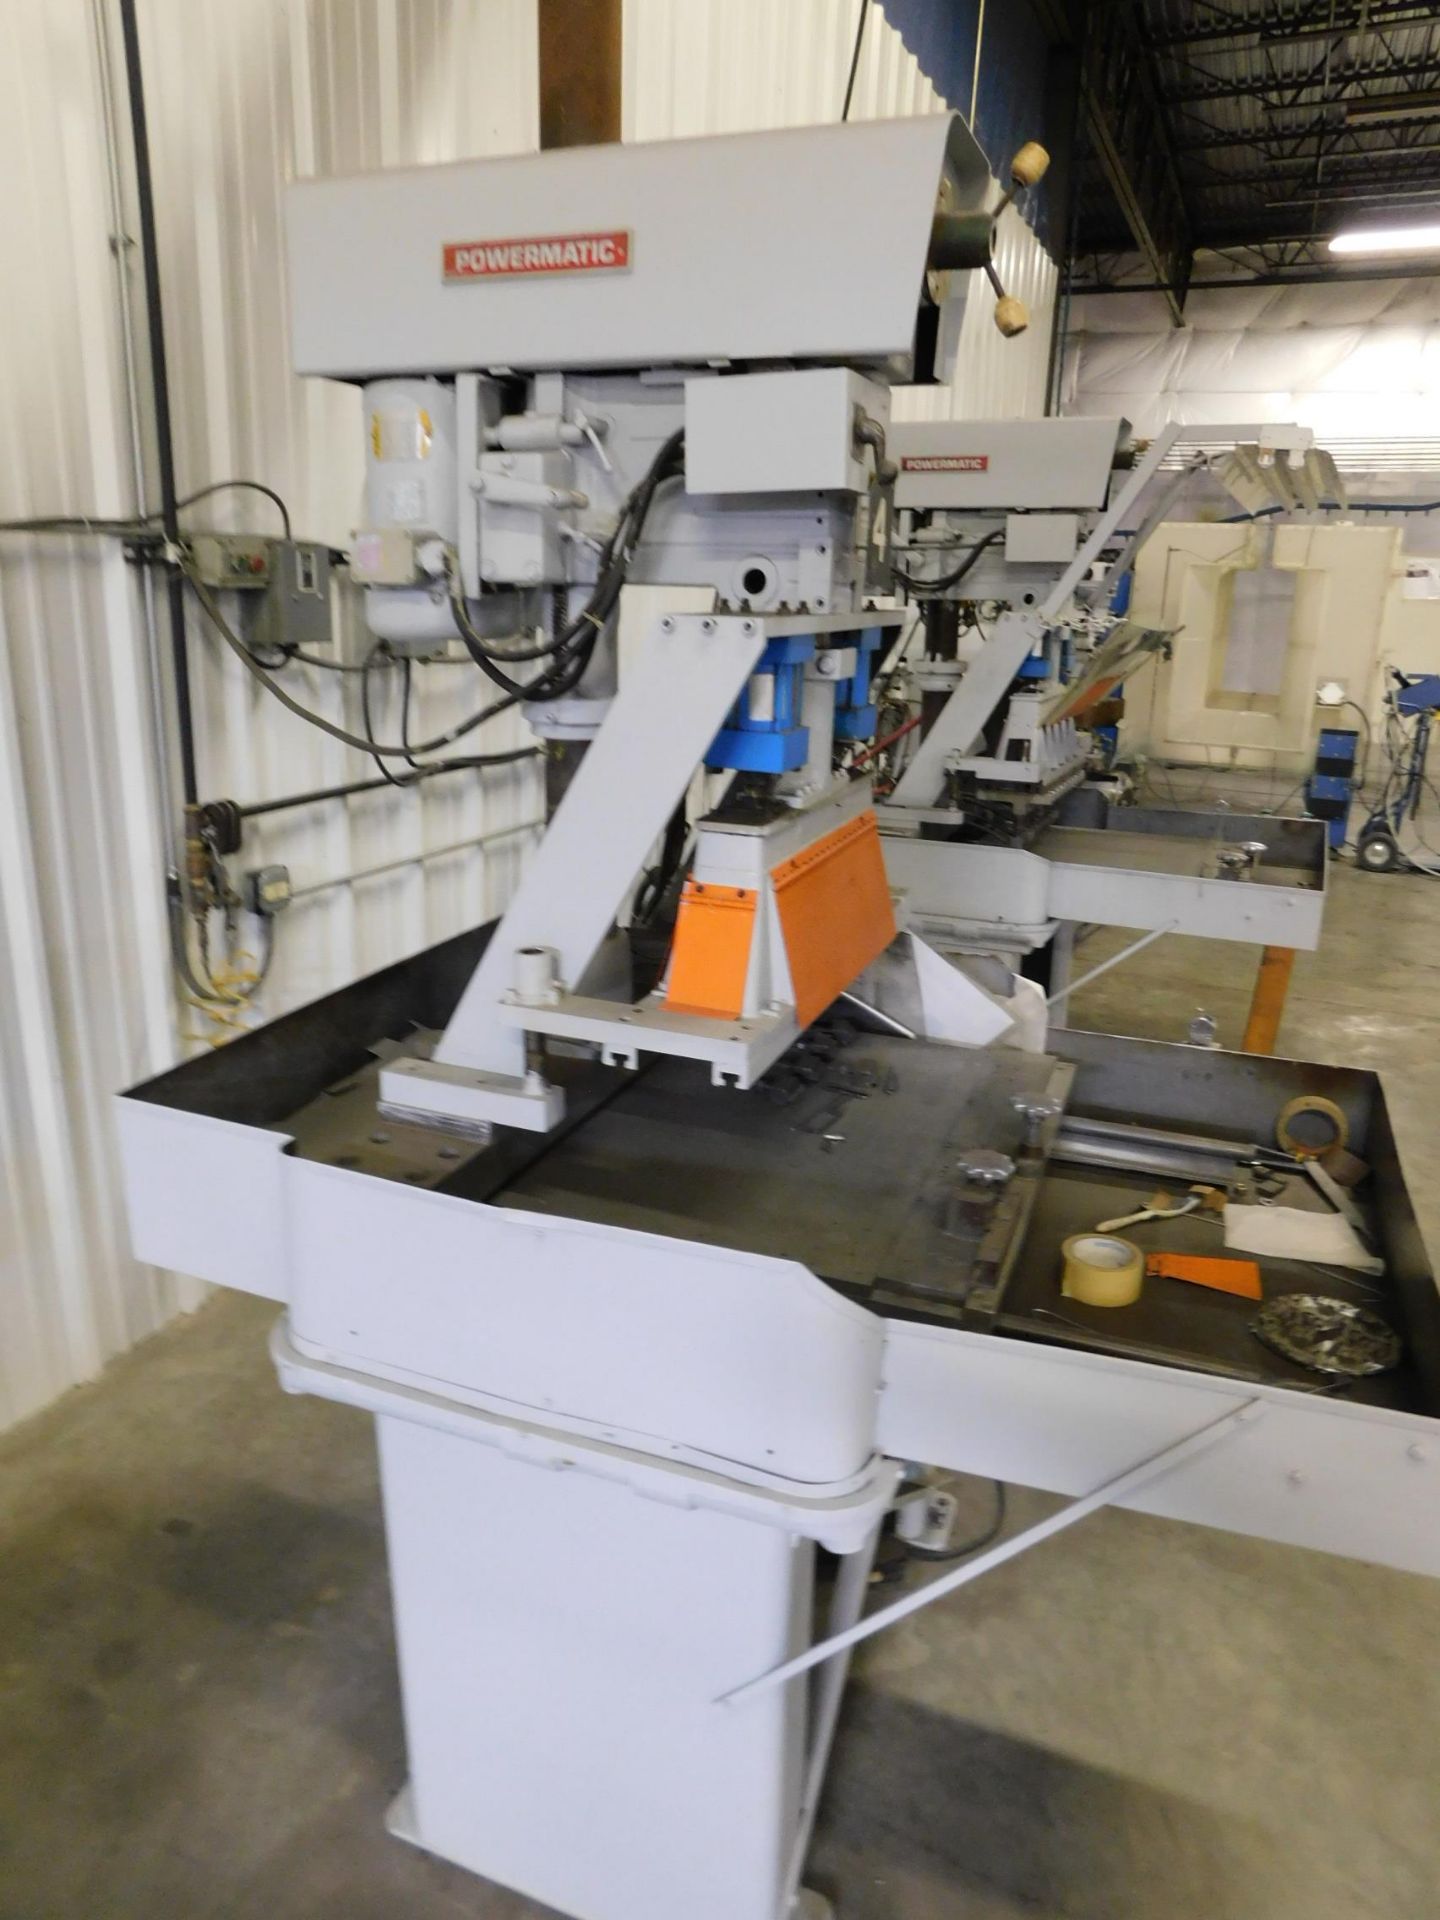 Powermatic Model 1200 Single Spindle Drill Press, 20", with Commander Drill Head - Image 4 of 6